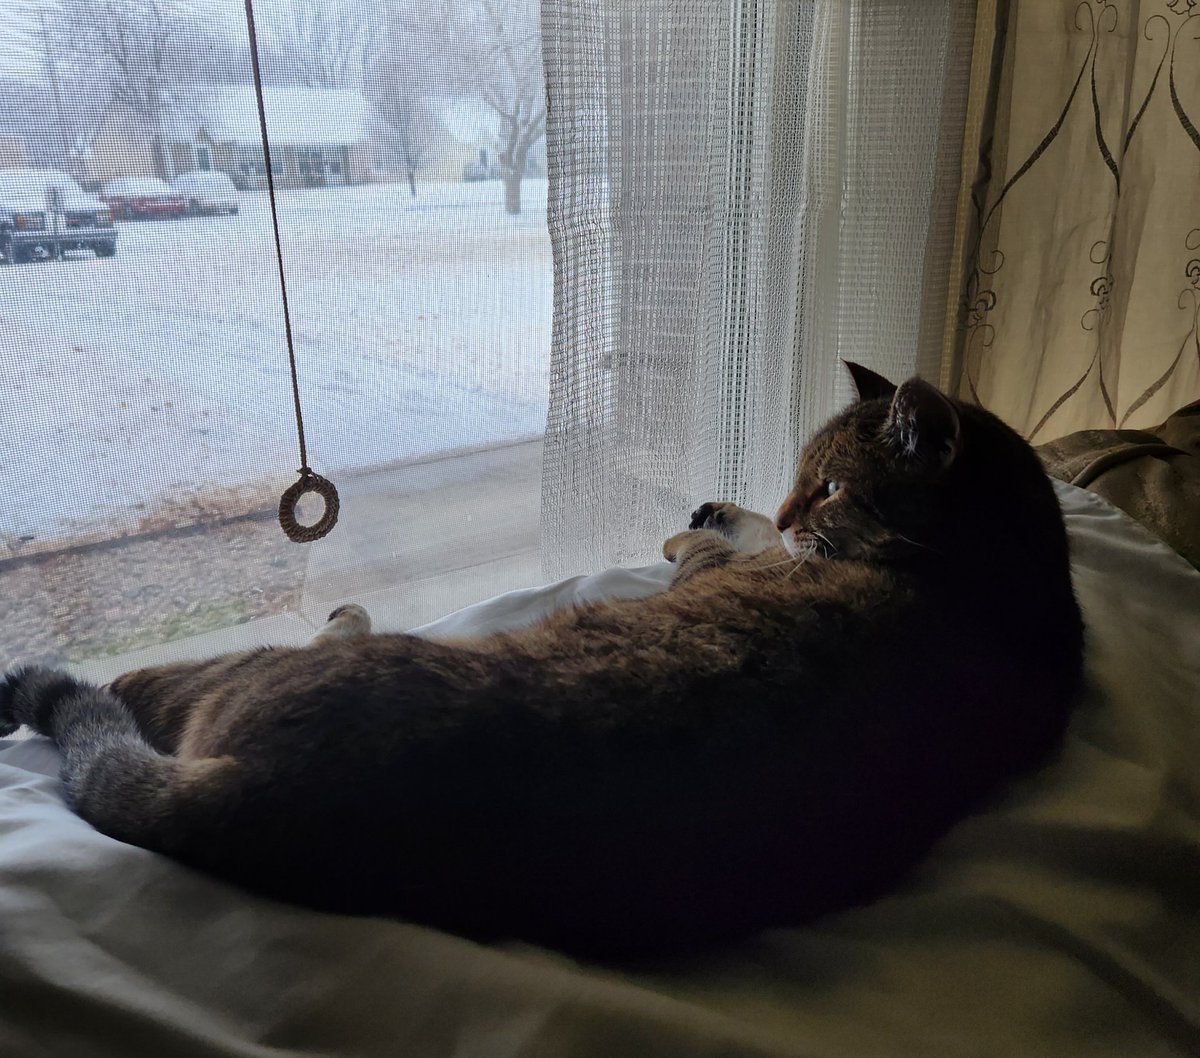 Happy #Caturday #CatsOfTwitter !
Weller is laying on her heaty pad watching the snow. Hope all the kitties have a pawtastic day!😃